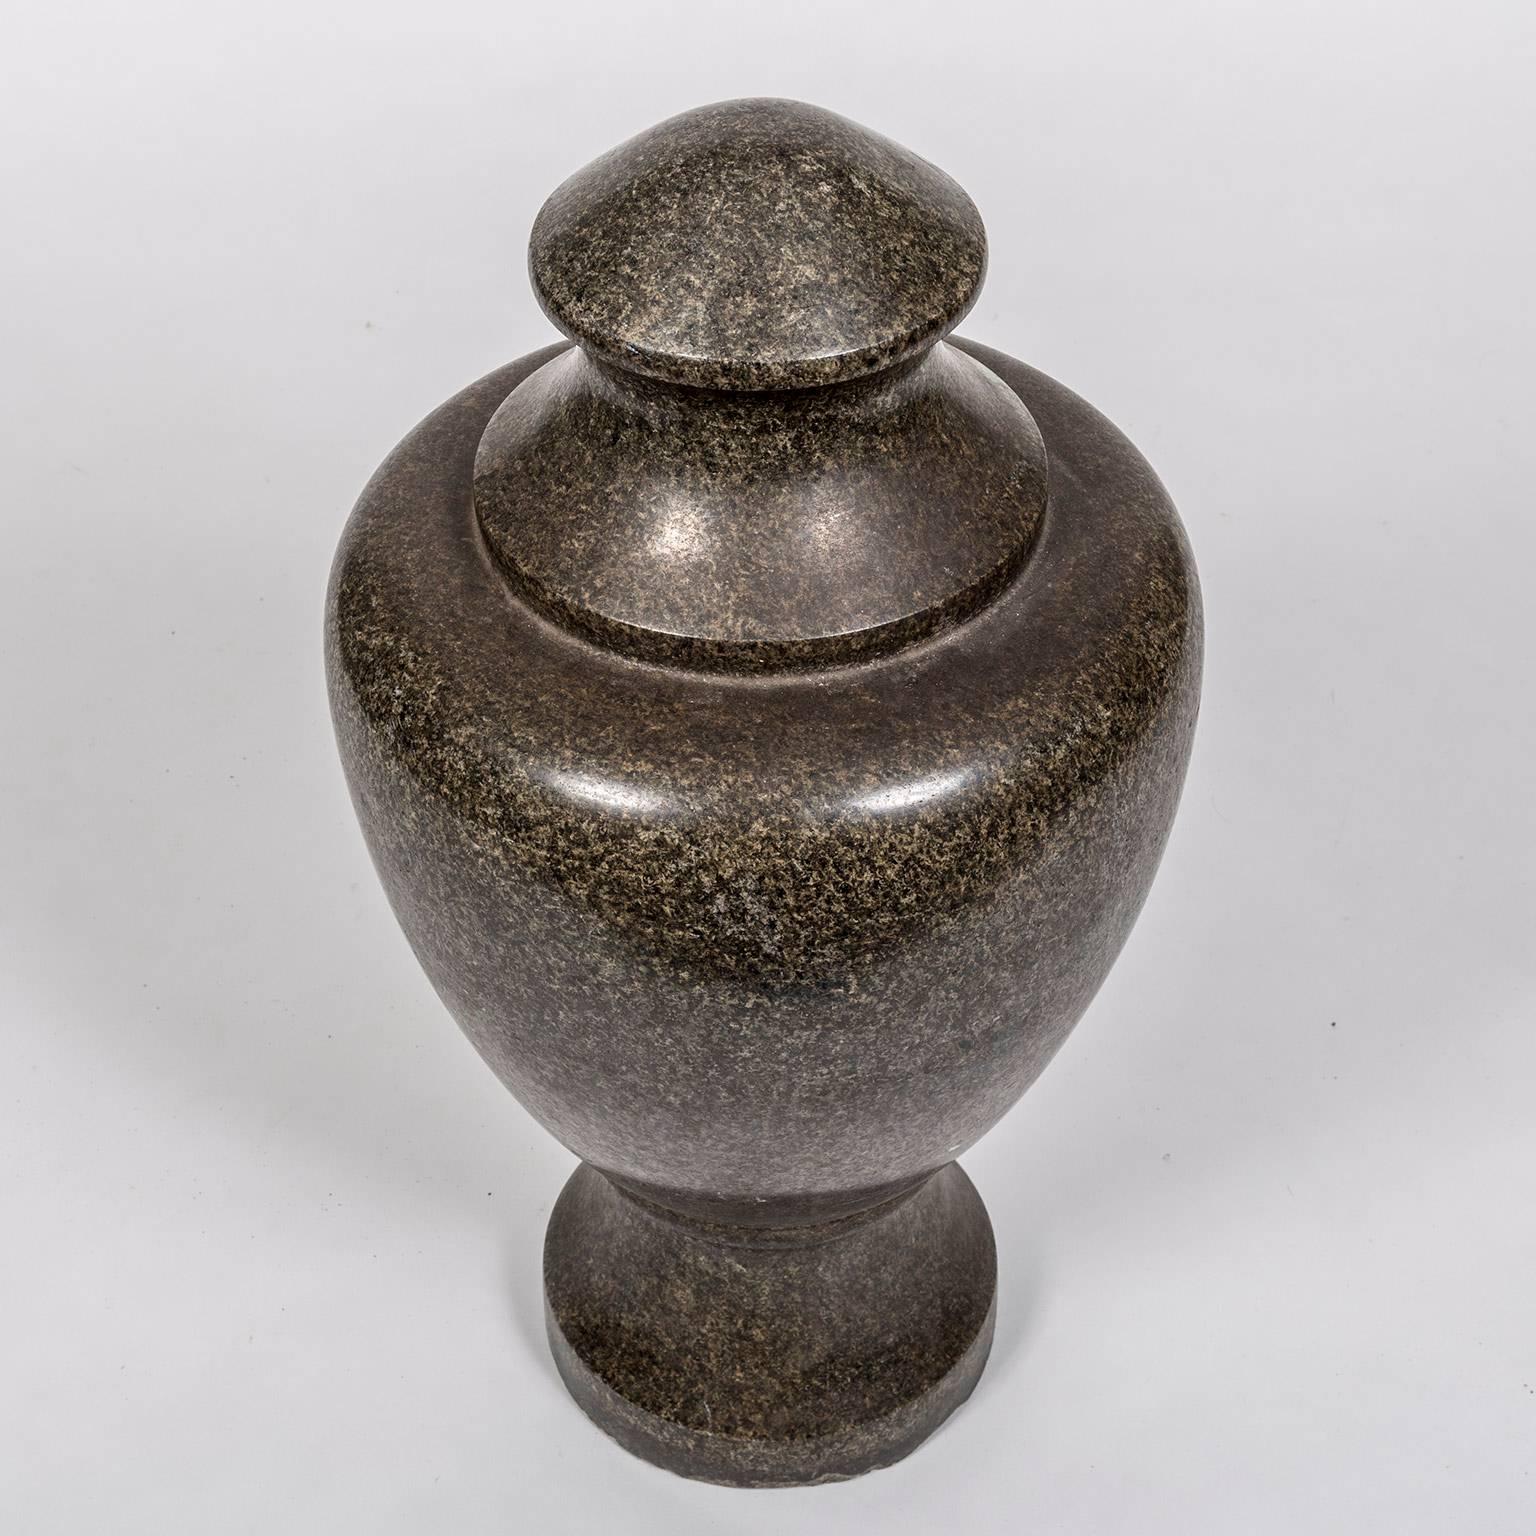 19th century granite stone Grand Tour style decorative vase. Granite is a very hard igneous rock that has a very pleasing granular decoration. These two qualities are responsible for its use in architectural and decorative elements from as far back